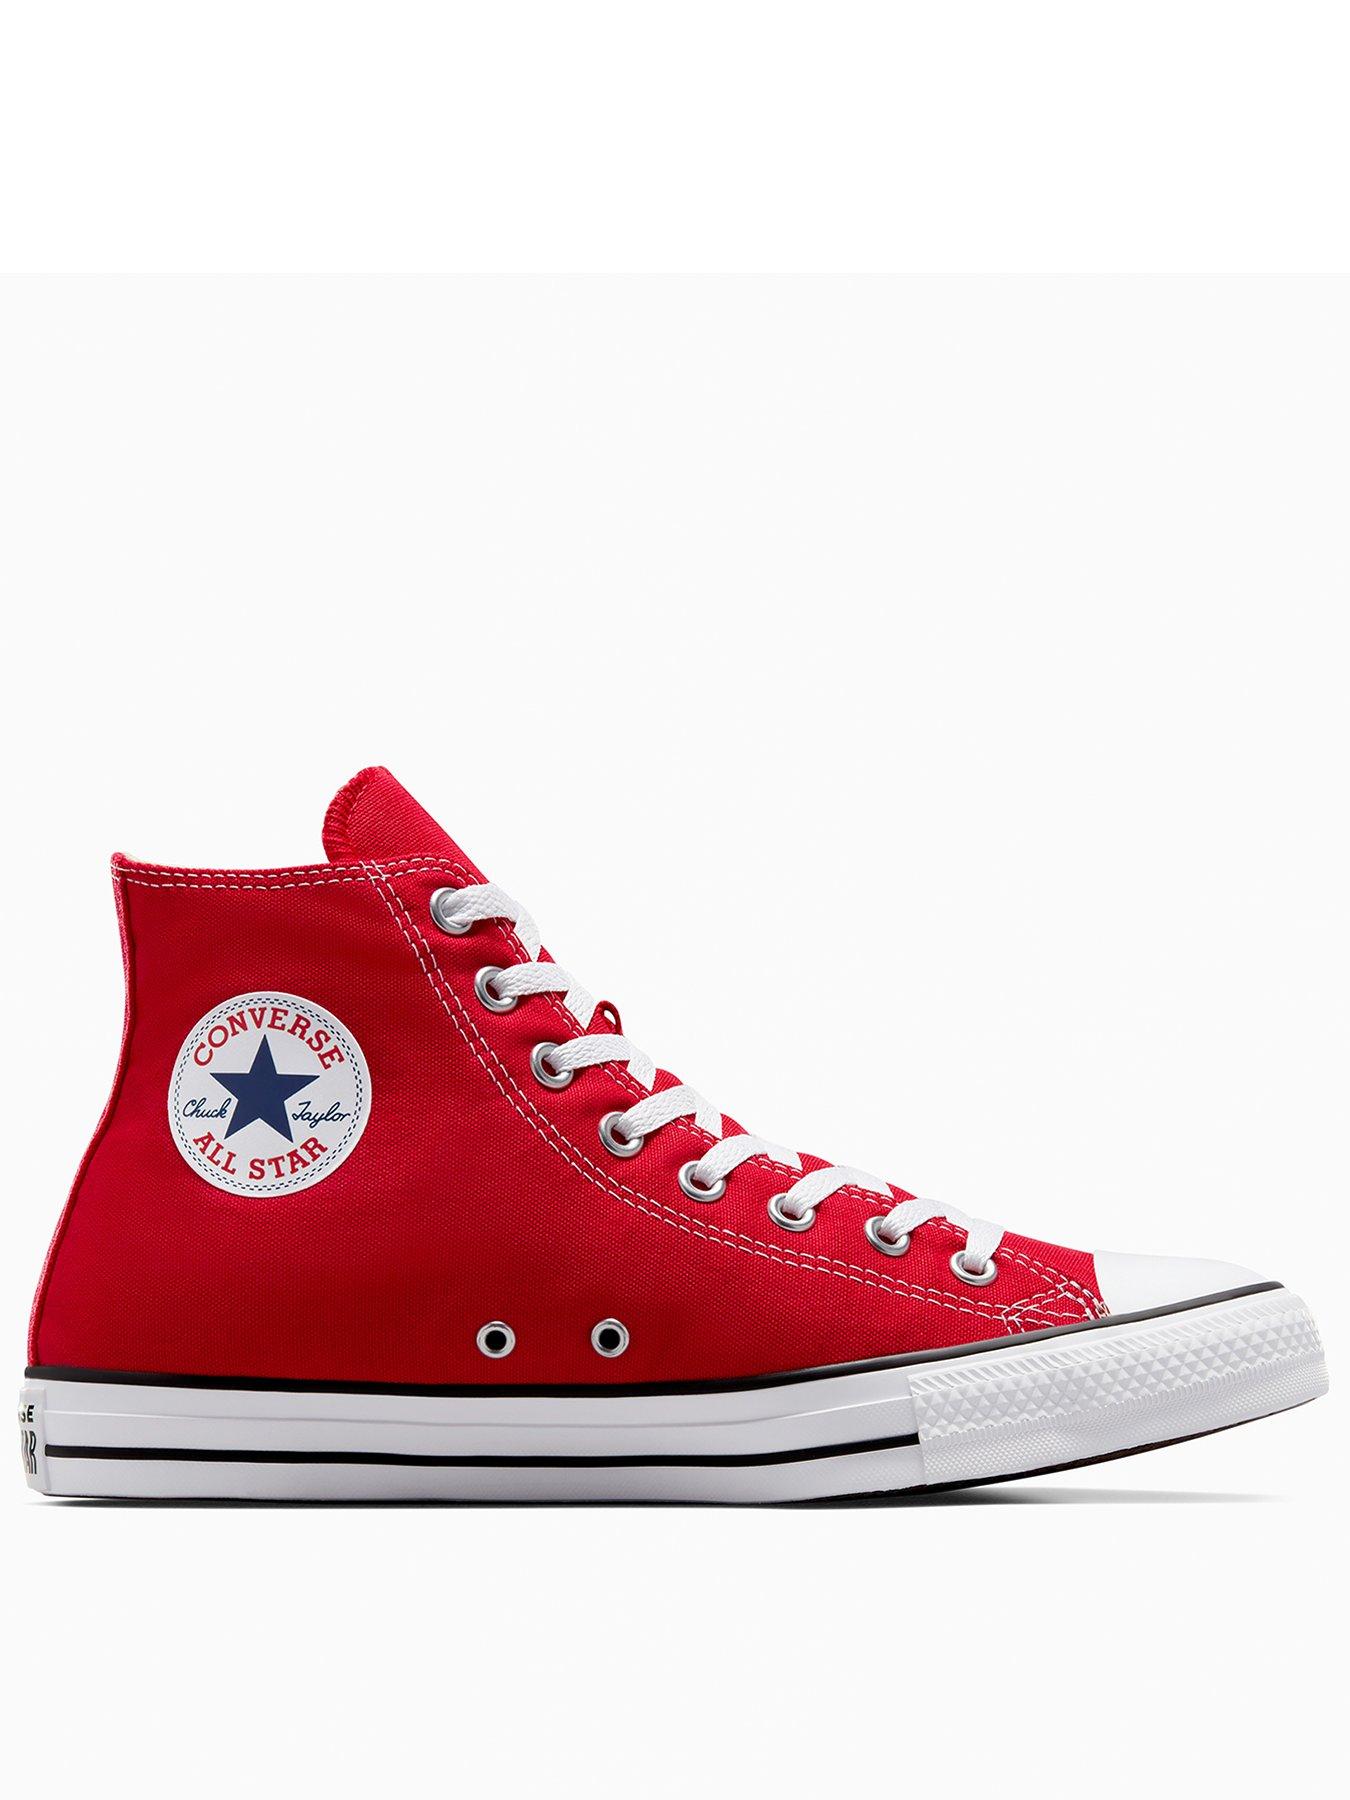 Converse Unisex Hi Top Trainers - Red | Very.co.uk